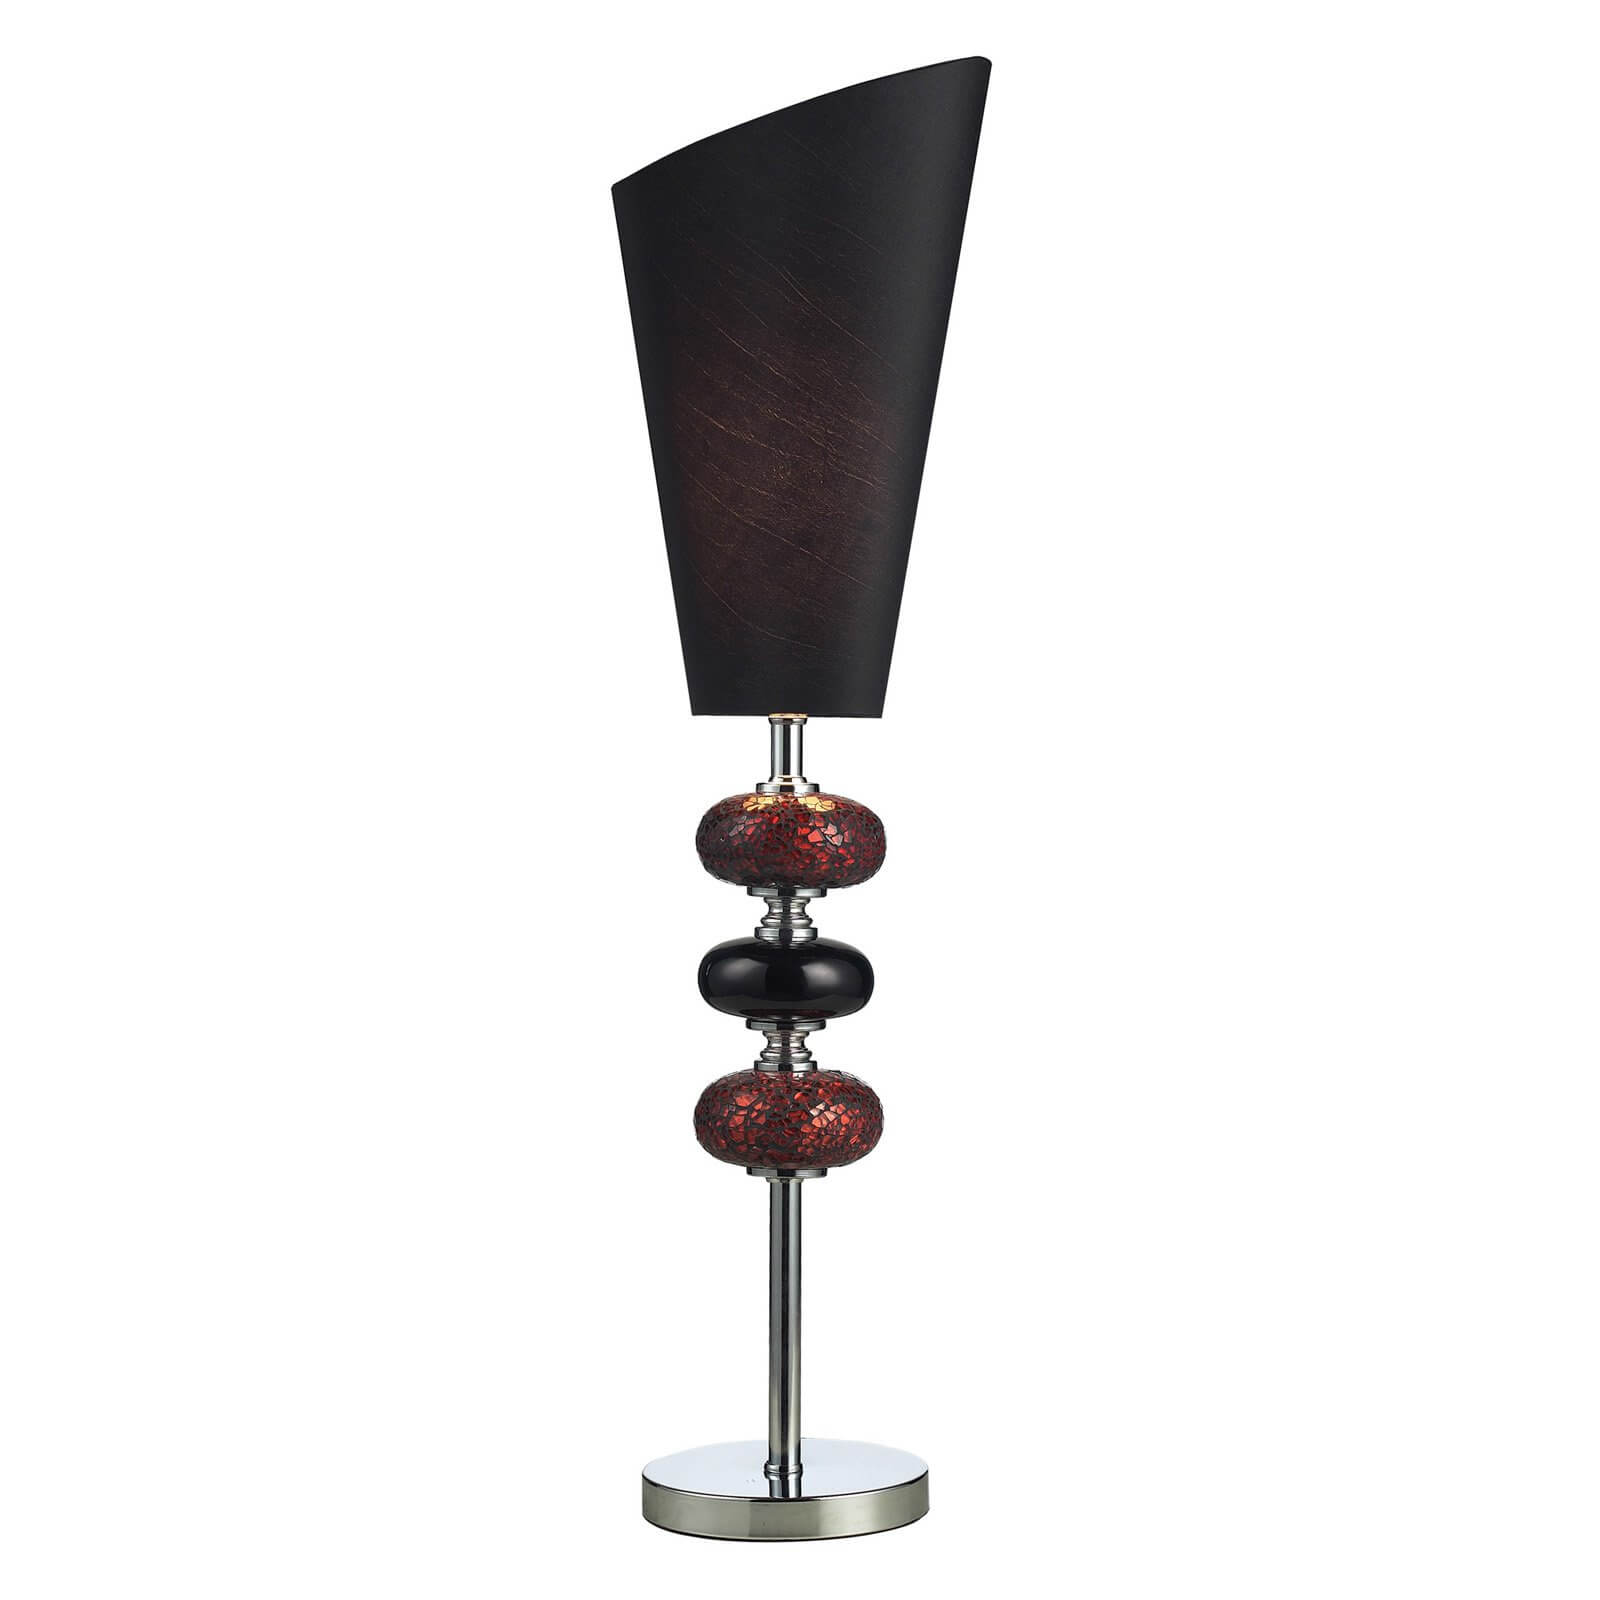 Our first torch lamp features a modern design, with metal body and angular shade.